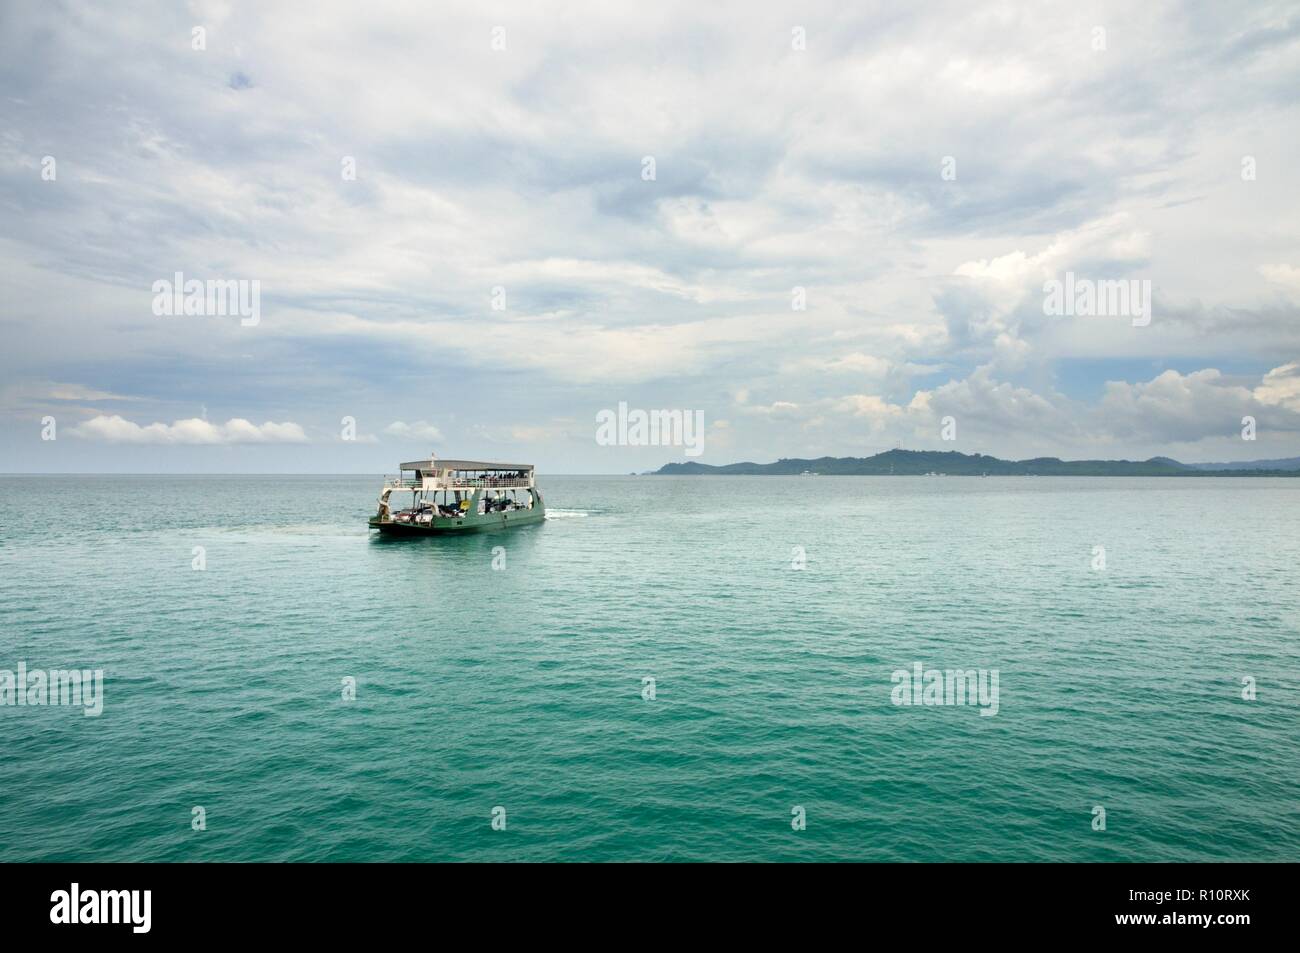 Landscape with turquoise tropical sea, cargo ferry, scenic clouds and tropical Koh Chang island on horizon in Thailand Stock Photo